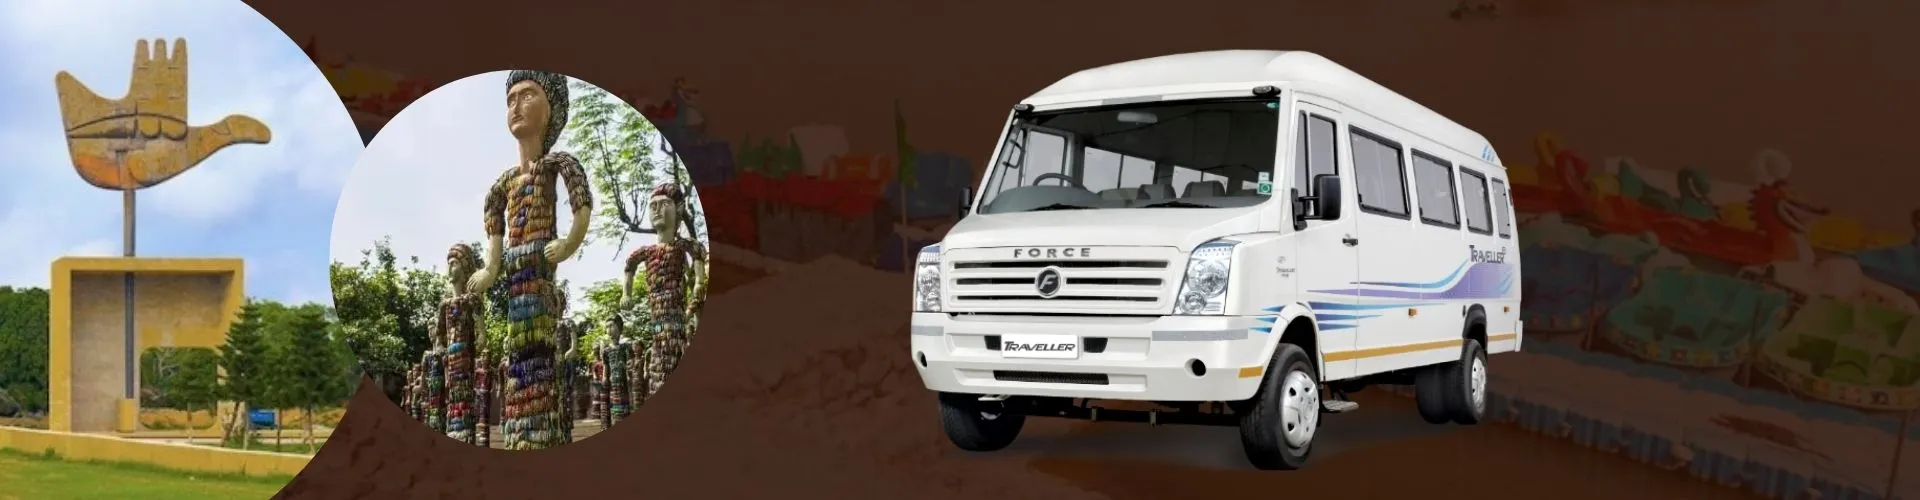 Delhi to Chandigarh Tour by Tempo Traveller Booking